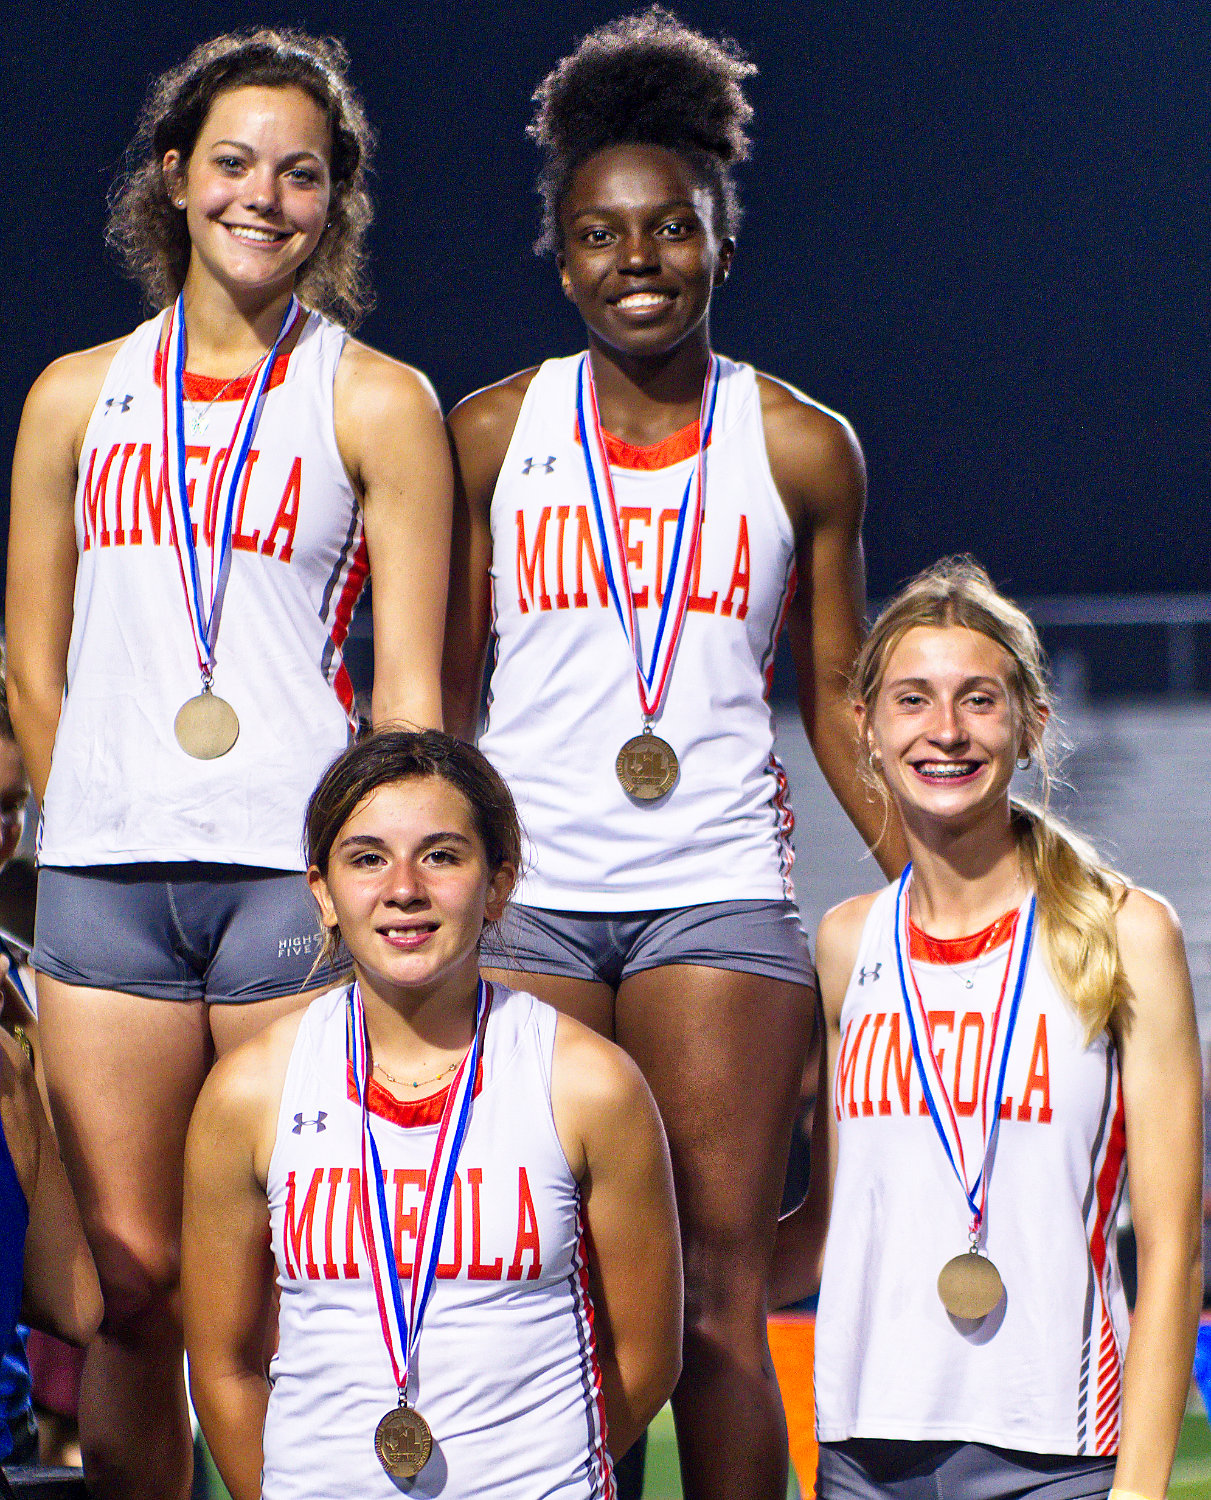 The Mineola state-qualifying relay team includes, clockwise from top left, Kozbie Riley, Shylah Kratzmeyer, Olivia Hughes and Carmen Carrasco.